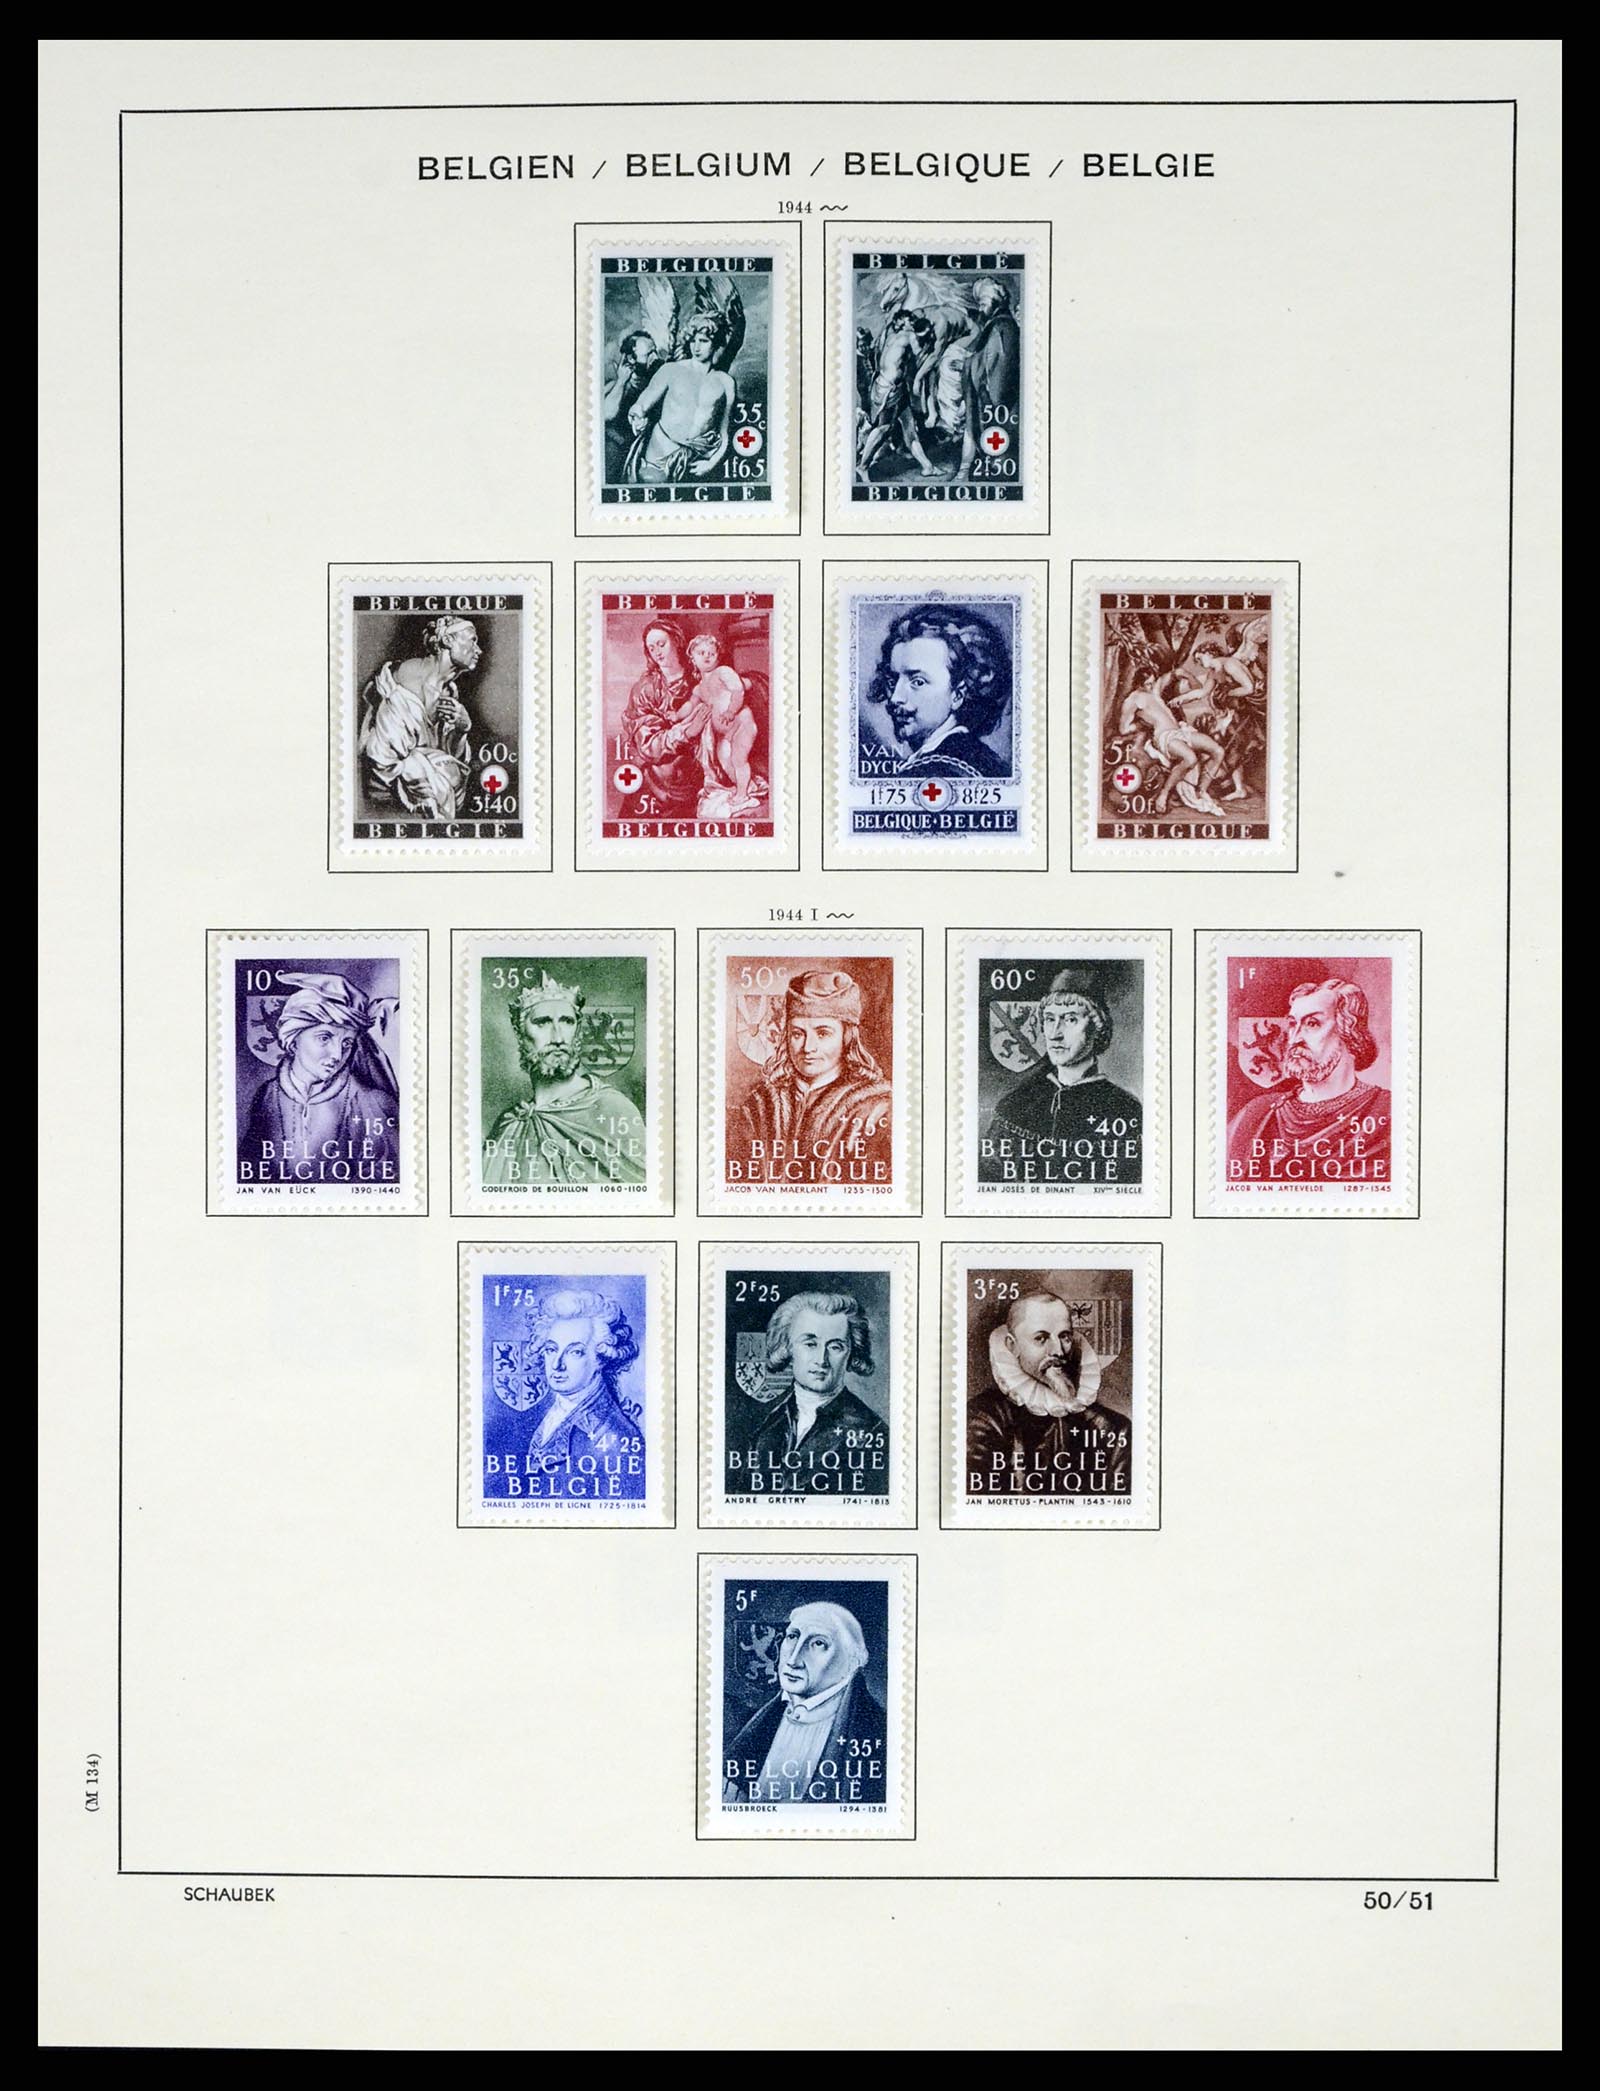 37595 058 - Stamp collection 37595 Super collection Belgium 1849-2015!